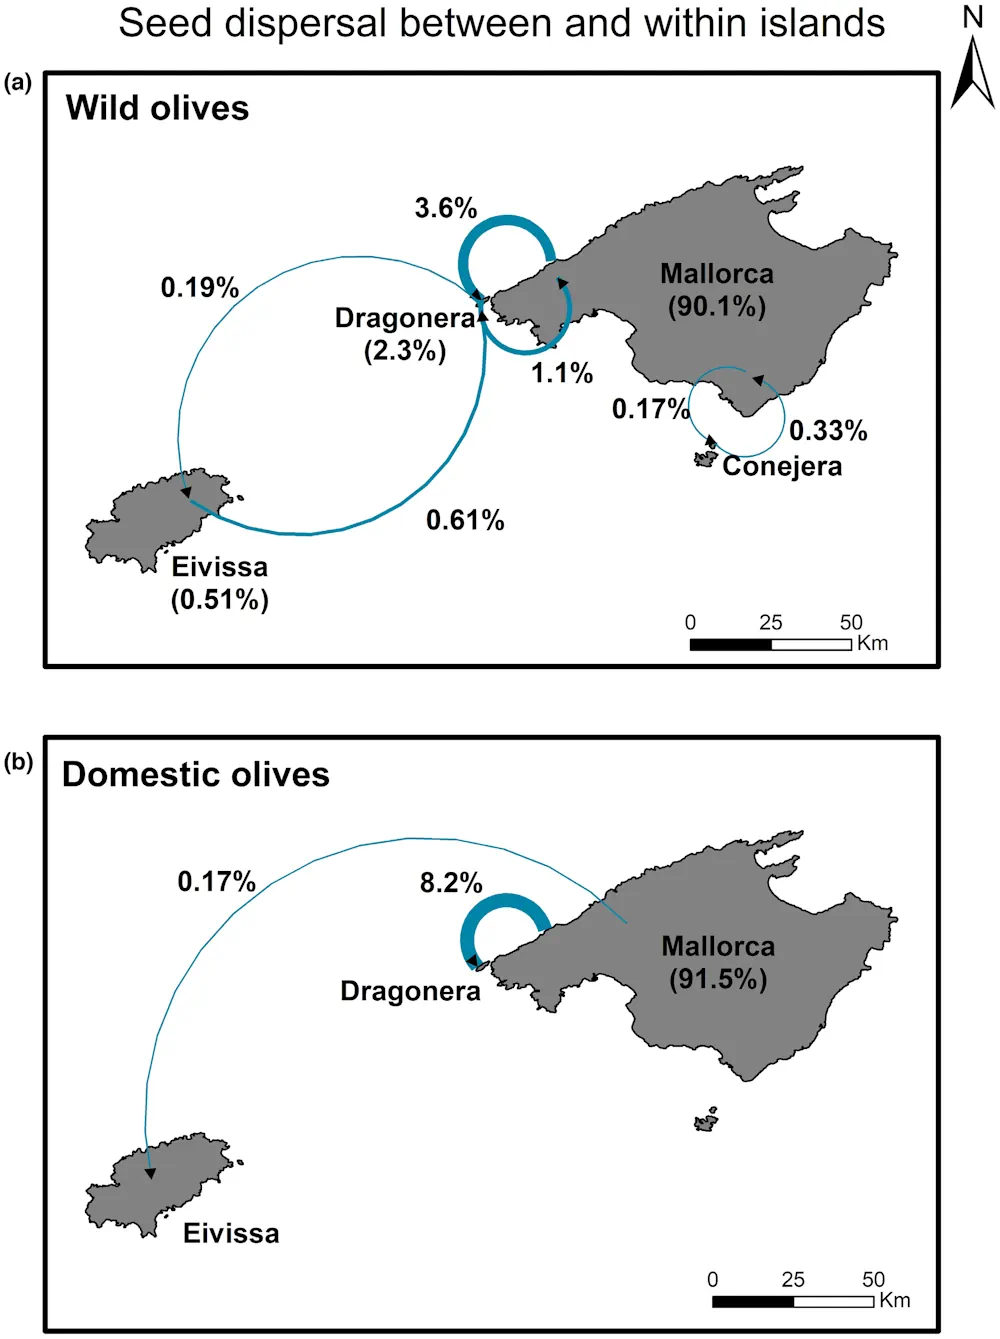 The Role Of Gulls In Spreading Olive Seeds Across Balearic Islands